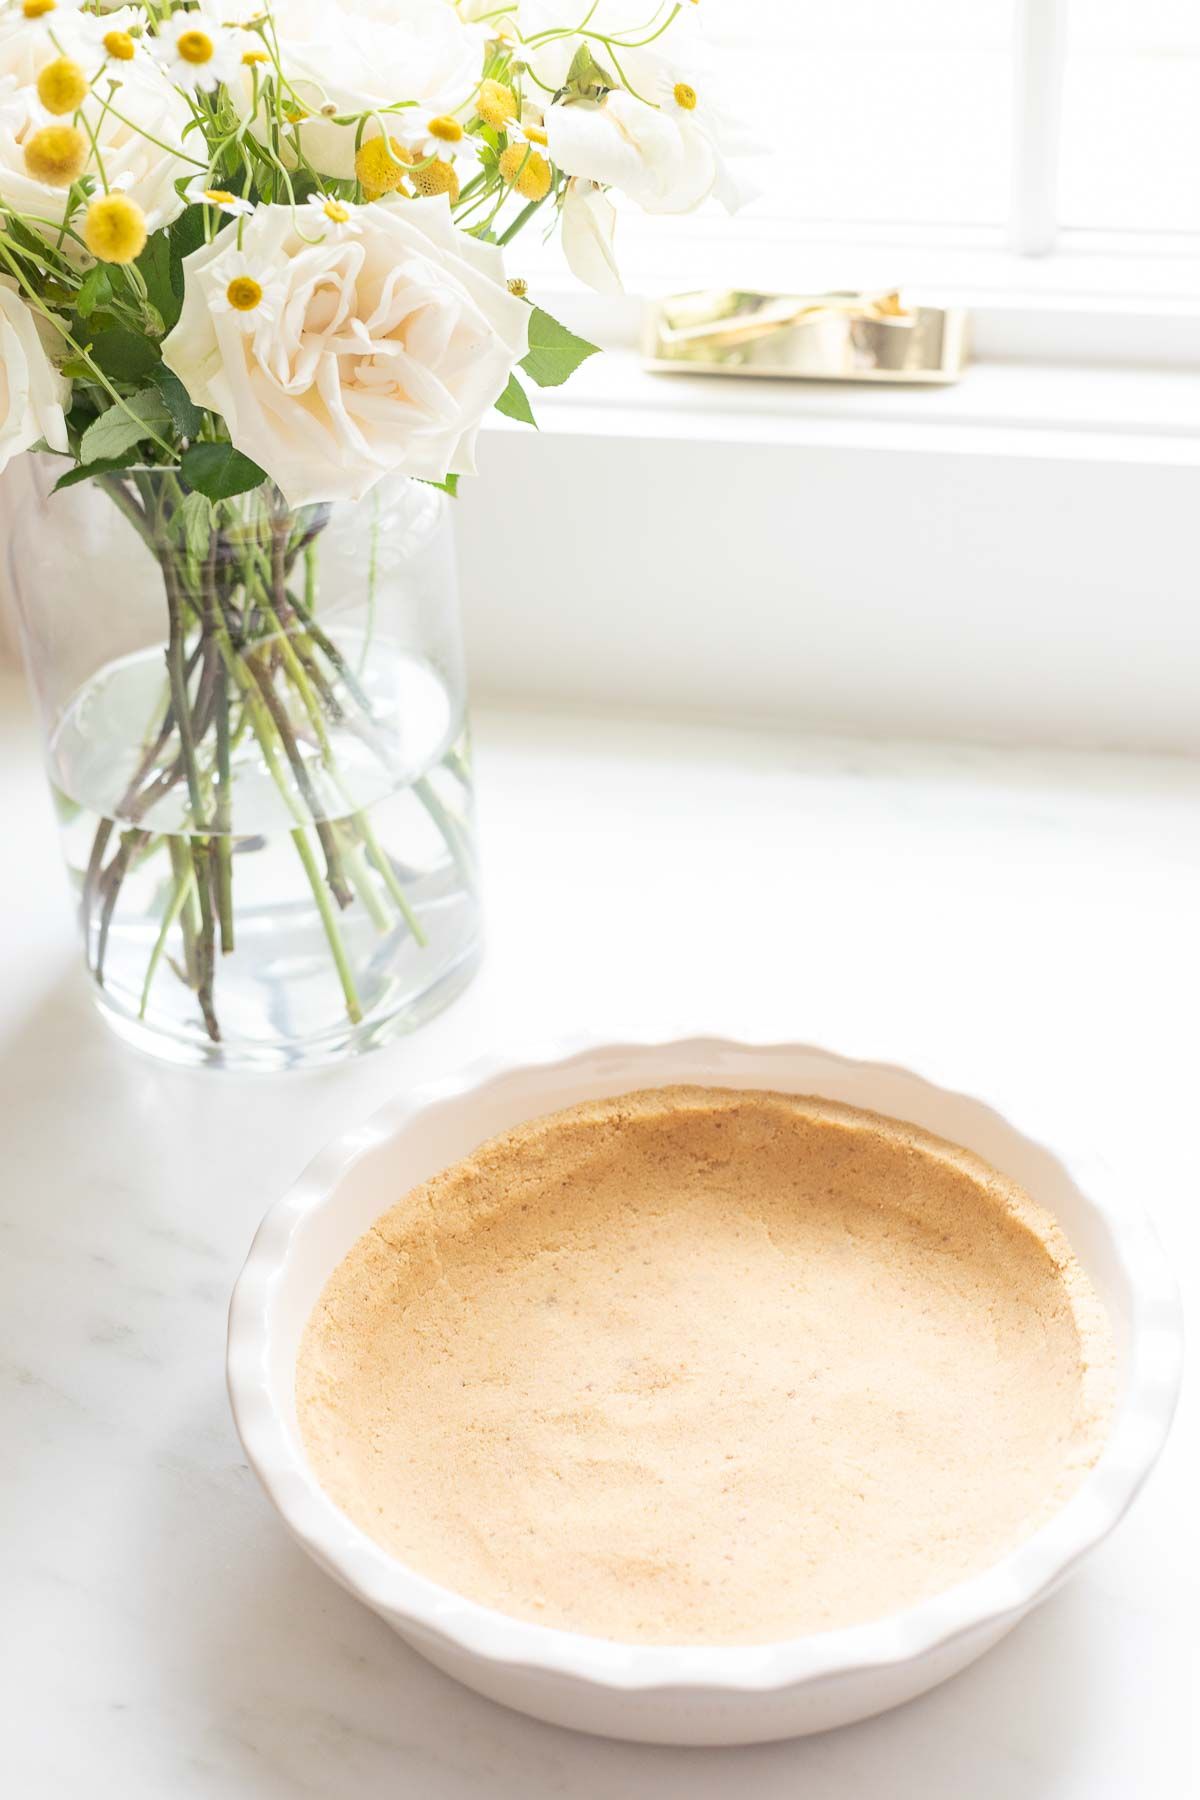 A shortbread crust pressed into a white ruffled ceramic pie dish on a marble surface, flowers to the side